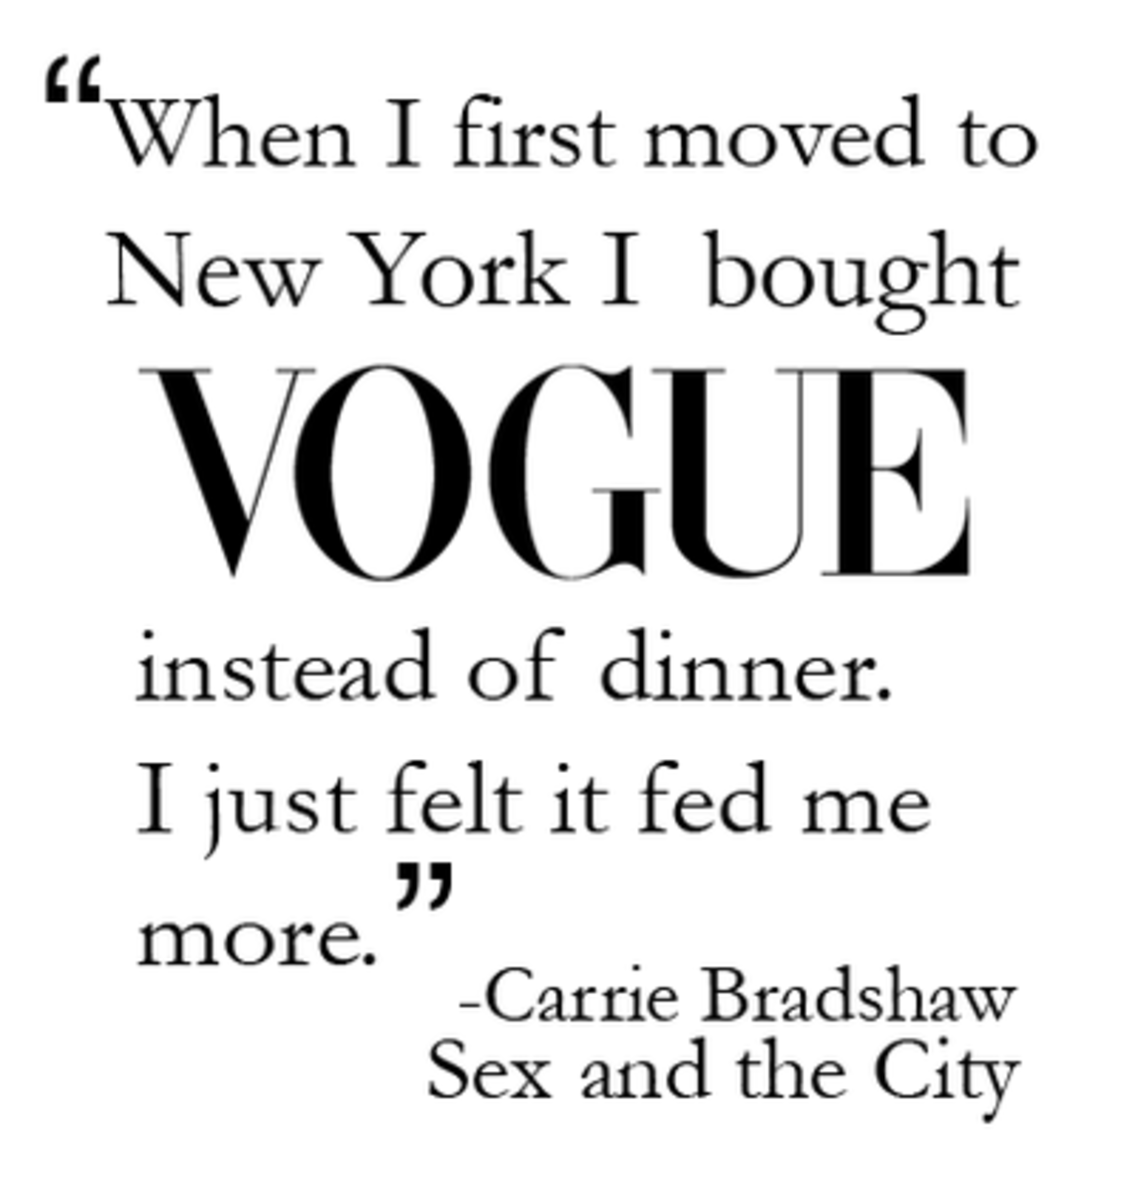 sex-and-the-city-unforgettable-quotes